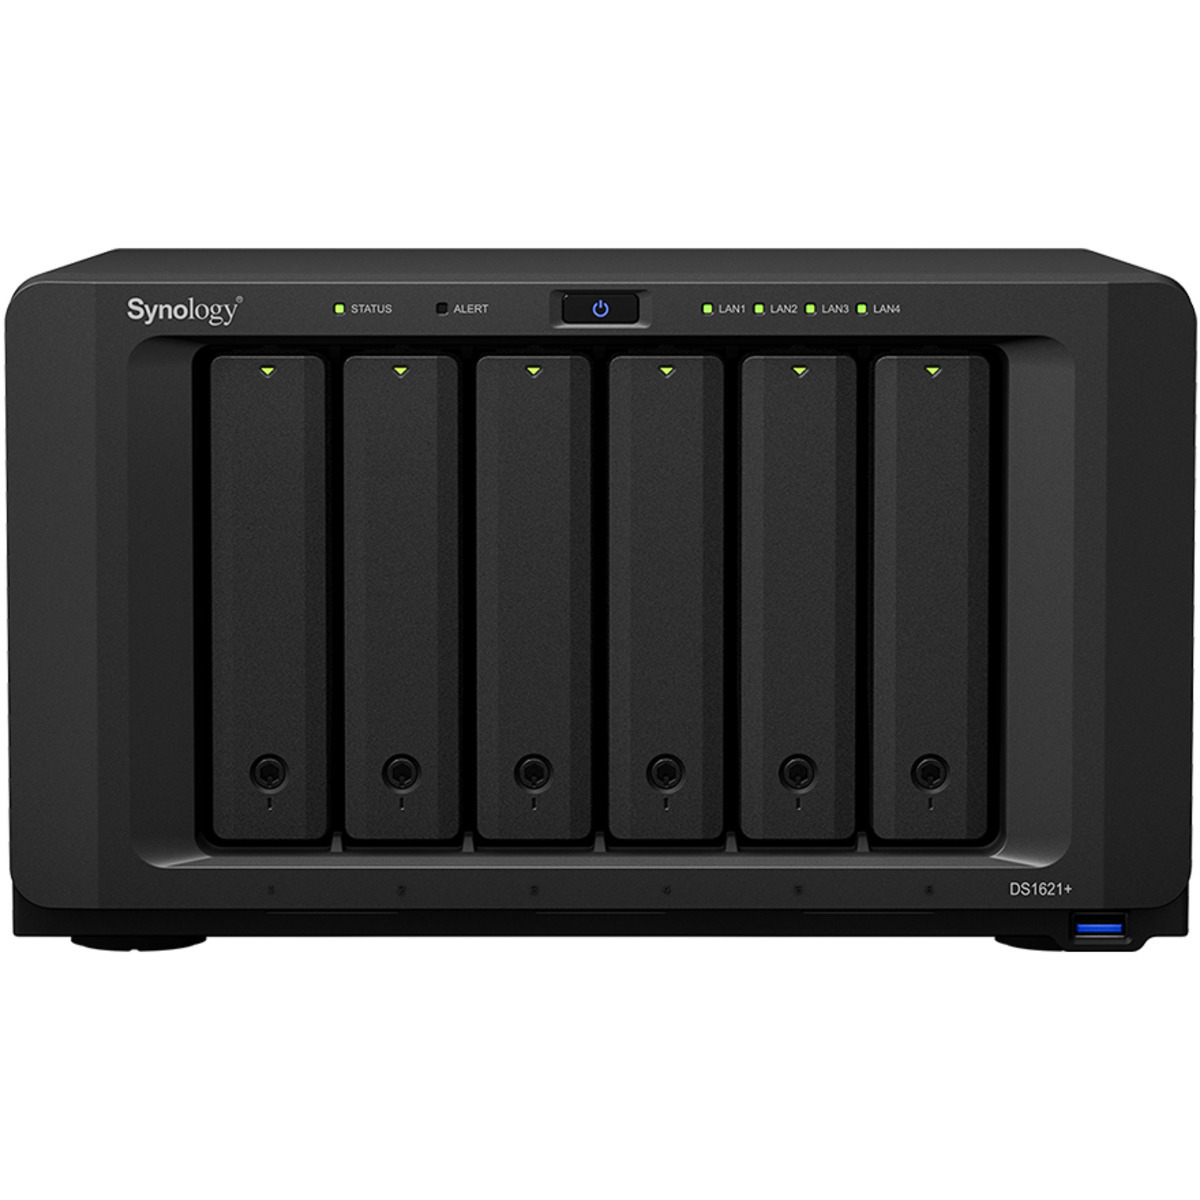 Synology DiskStation DS1621+ 48tb 6-Bay Desktop Multimedia / Power User / Business NAS - Network Attached Storage Device 3x16tb Western Digital Gold WD161KRYZ 3.5 7200rpm SATA 6Gb/s HDD ENTERPRISE Class Drives Installed - Burn-In Tested - FREE RAM UPGRADE DiskStation DS1621+